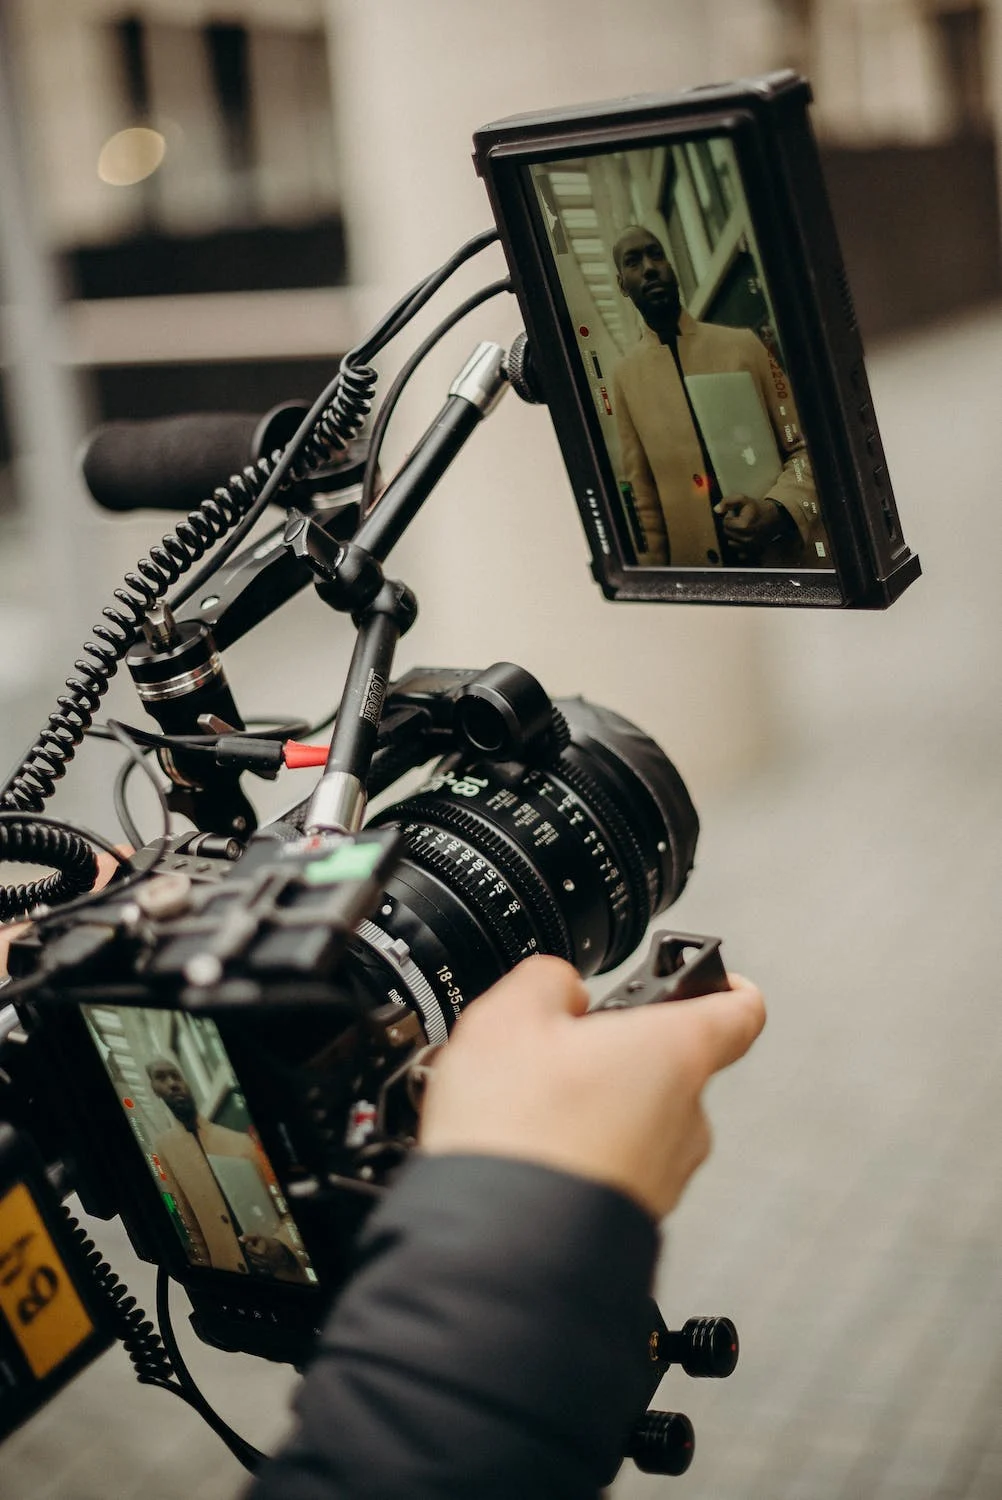 Why Invest in Video Production and Choose Dream Engine?